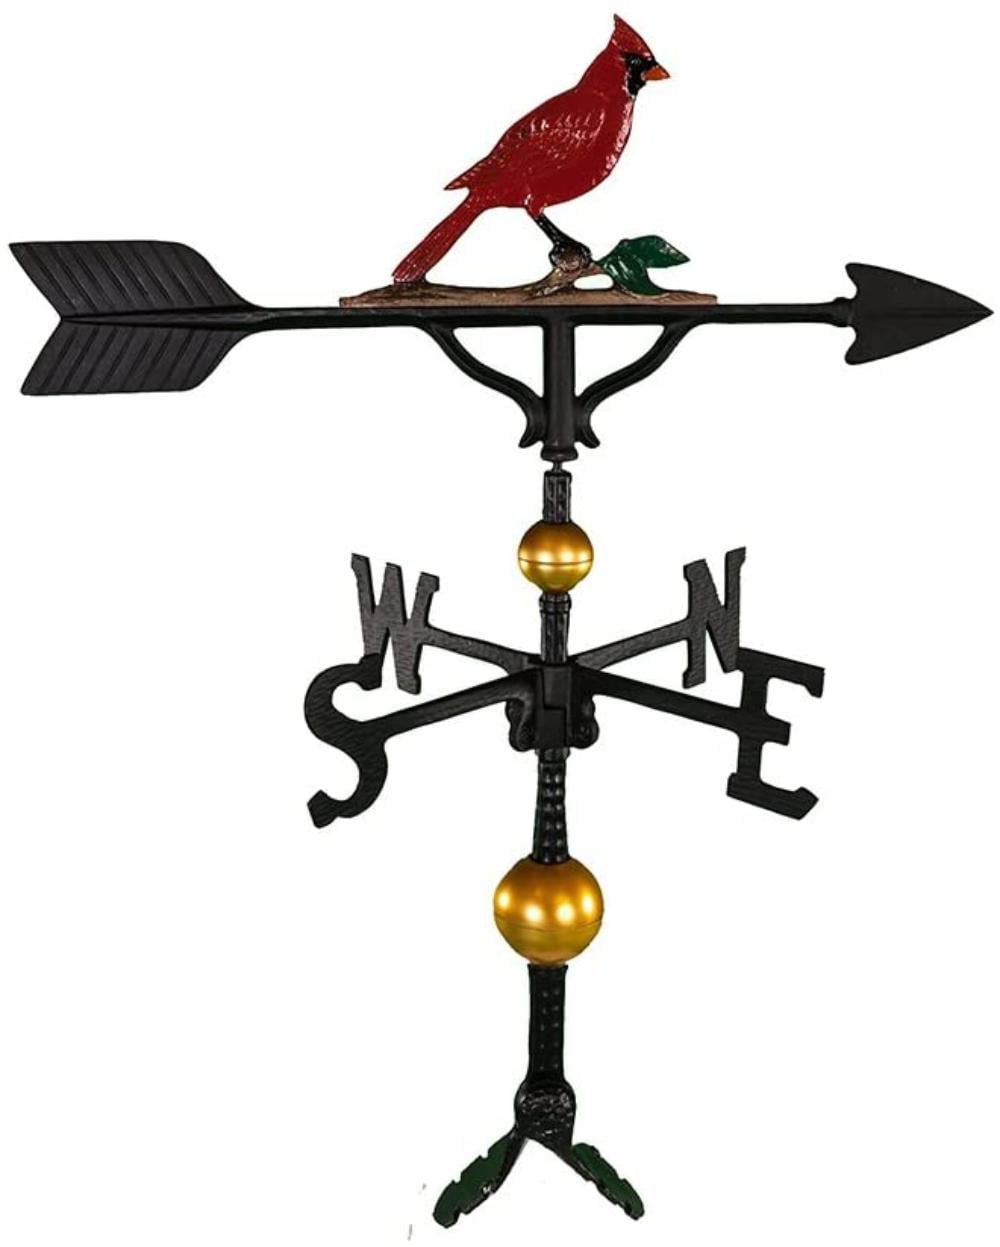 Montague Metal Products 32-Inch Weathervane with Color Rooster Ornament